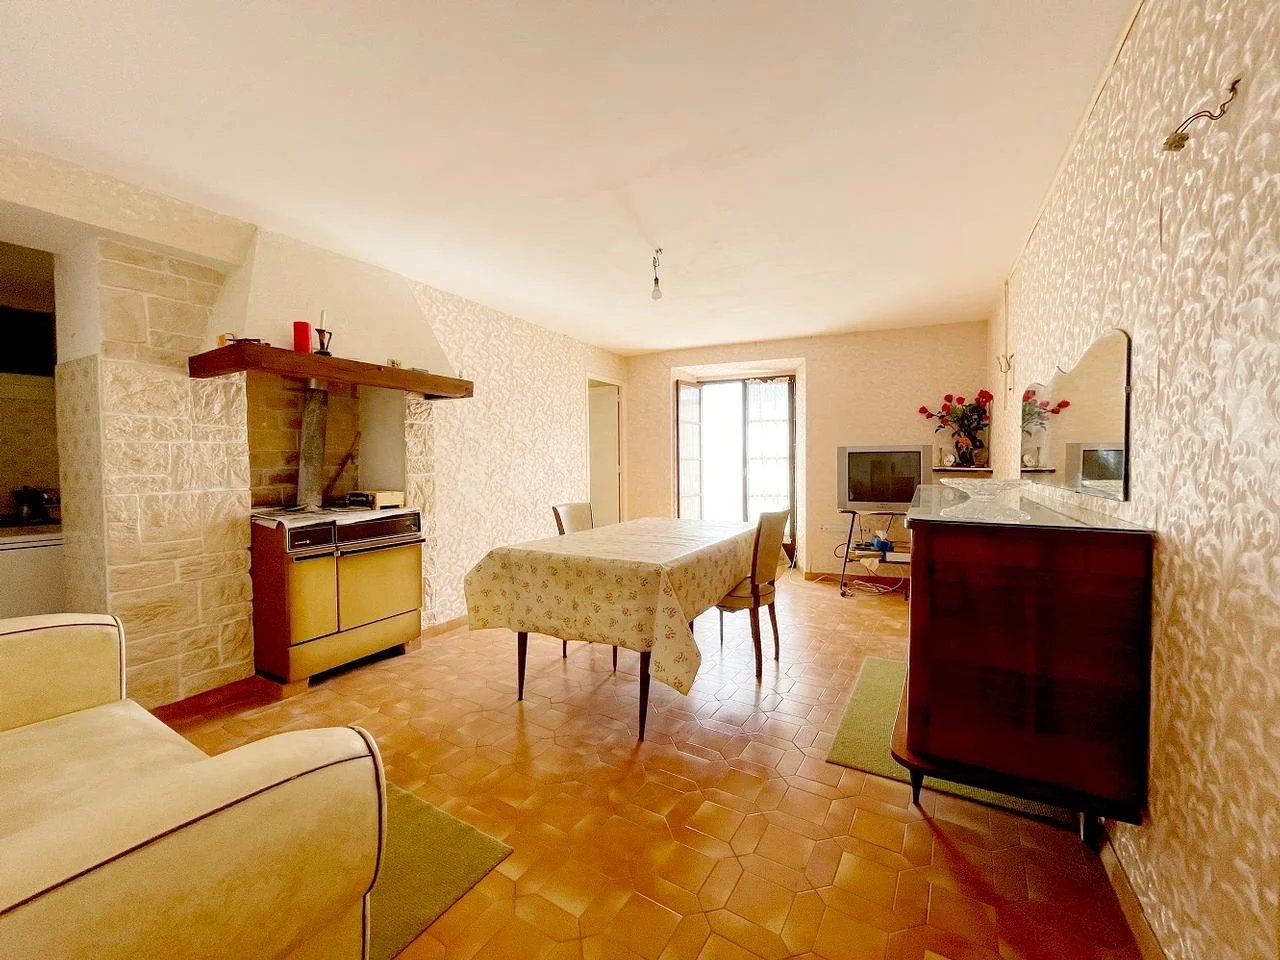 Appartement  3 Rooms 49m2  for sale    80 000 €